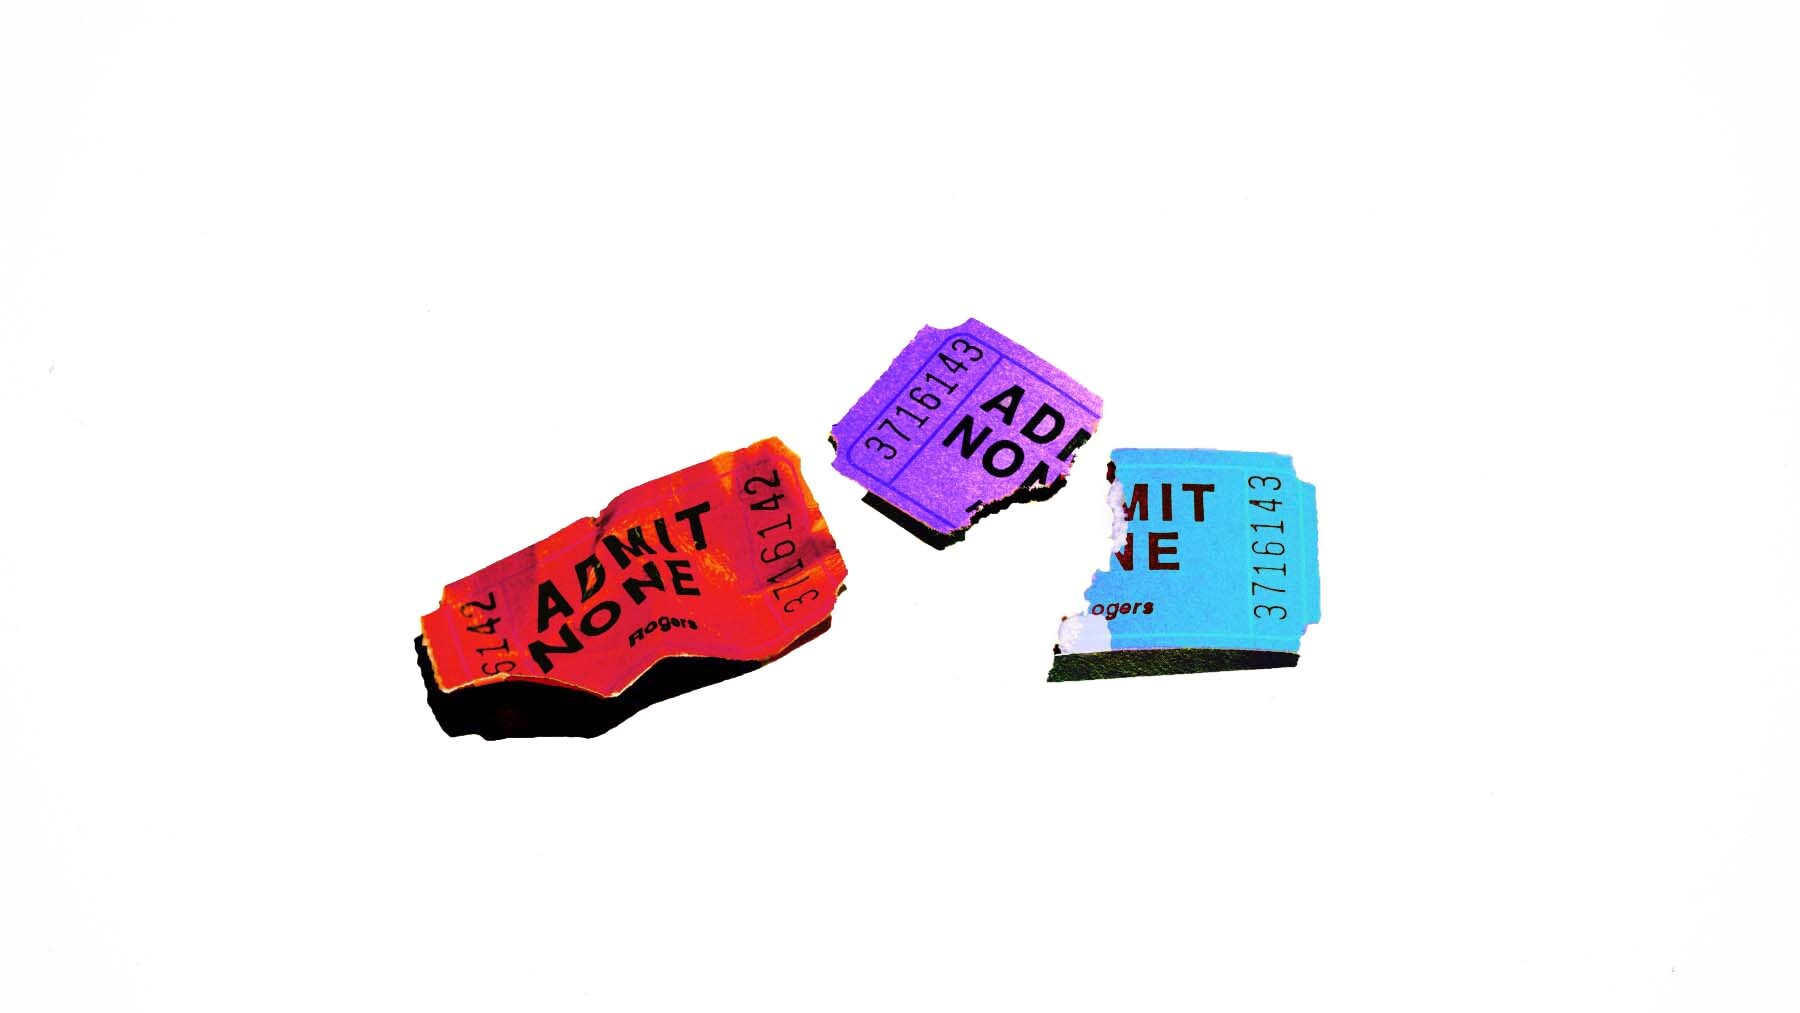 An illustration showing red, blue, and purple movie tickets, torn in pieces.